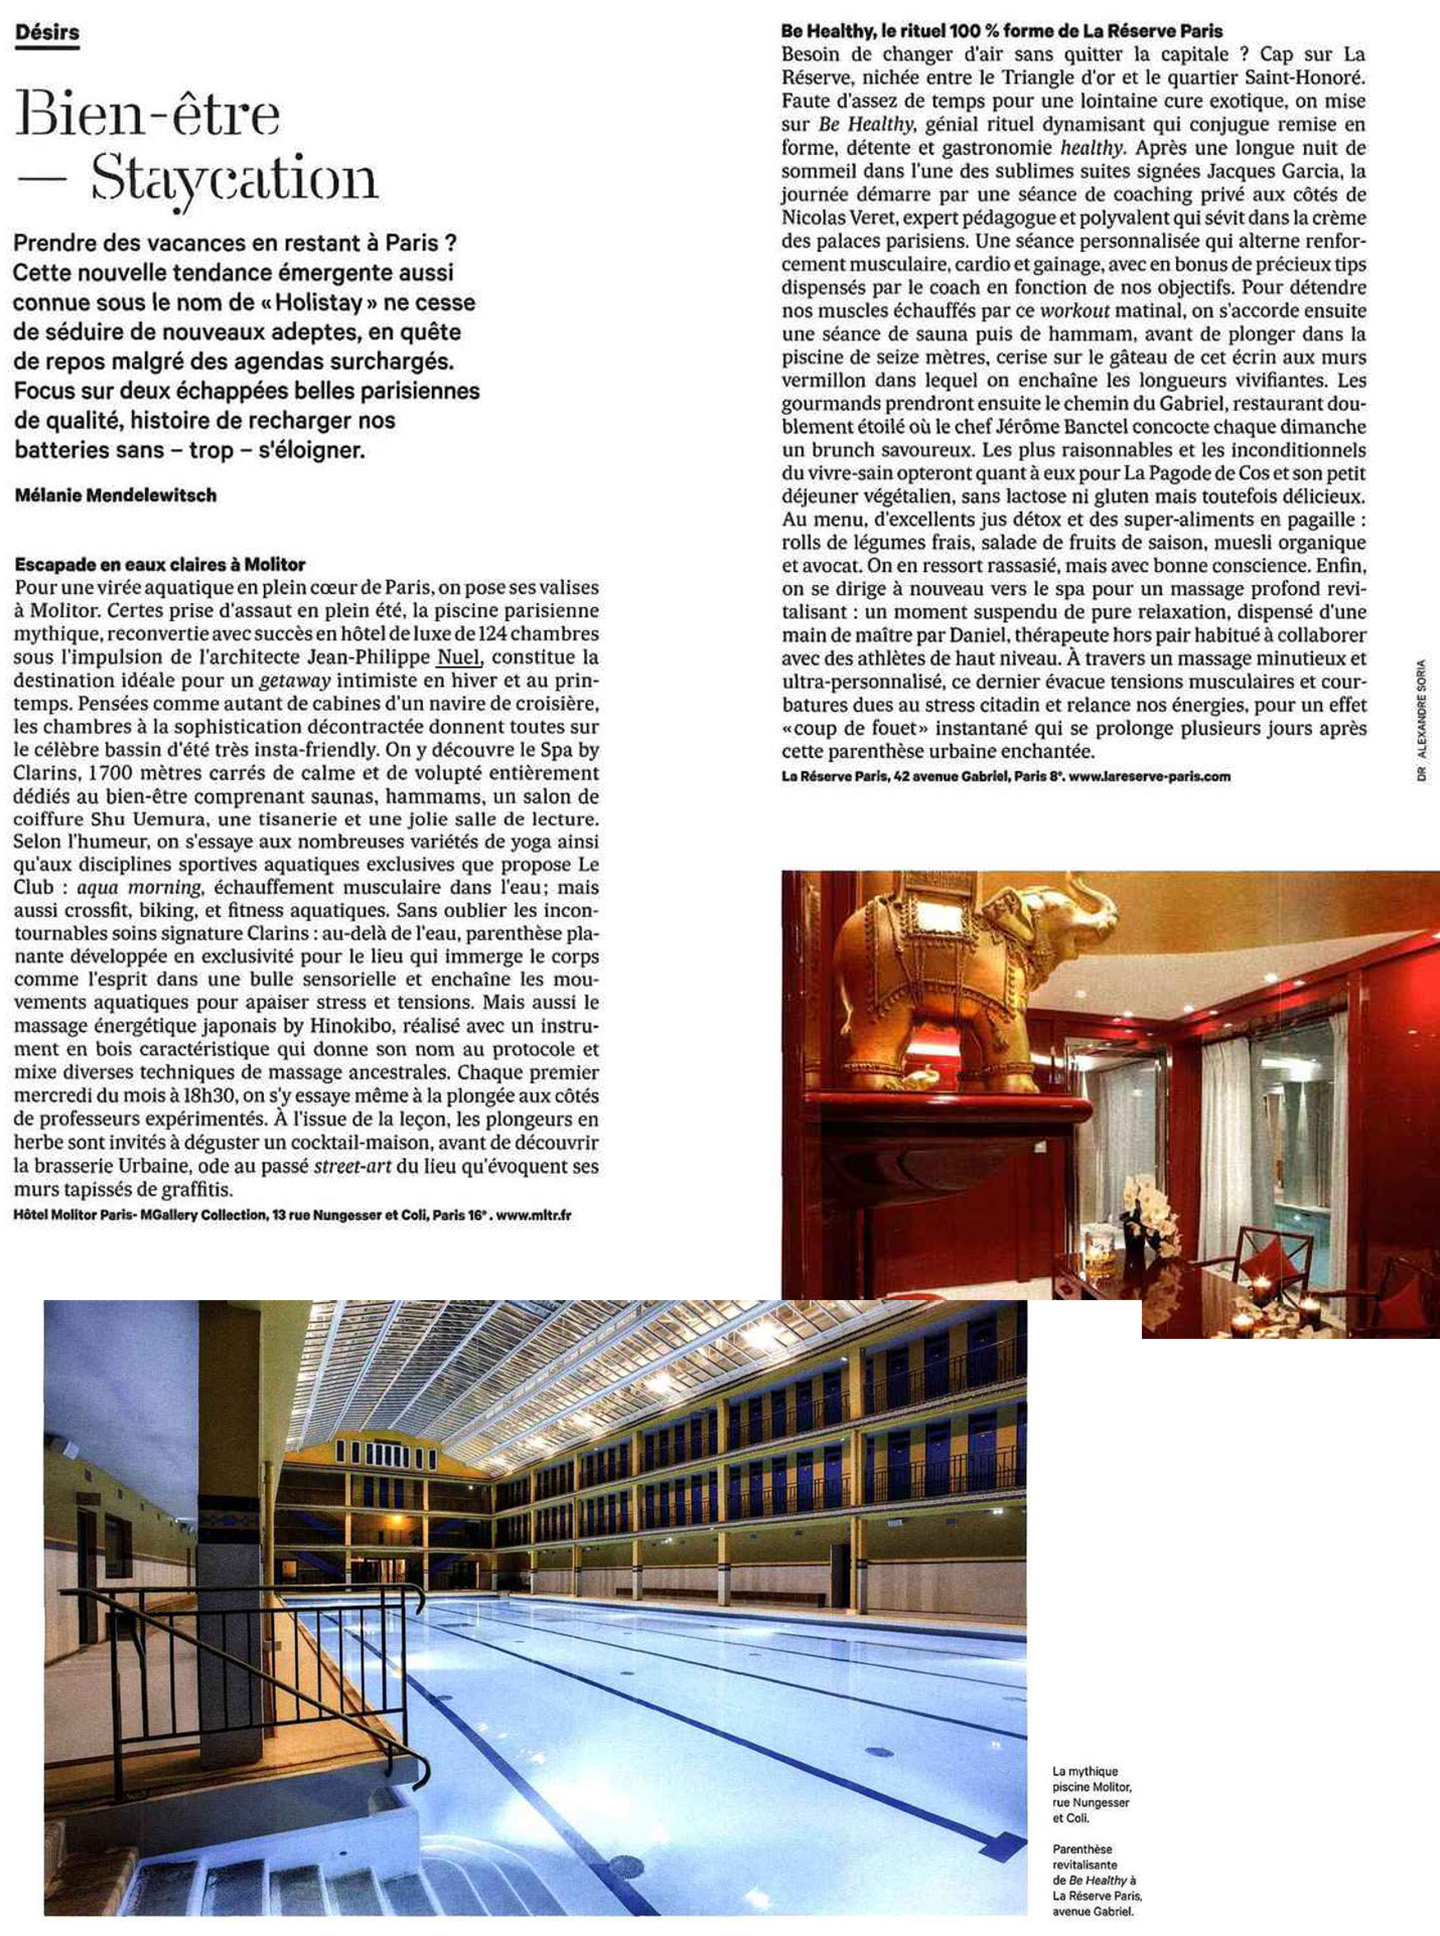 Article on the Molitor swimming pool realized by the studio jean-Philippe Nuel in the magazine les Echos, new lifestyle hotel, luxury interior design, rehabilitation, street art